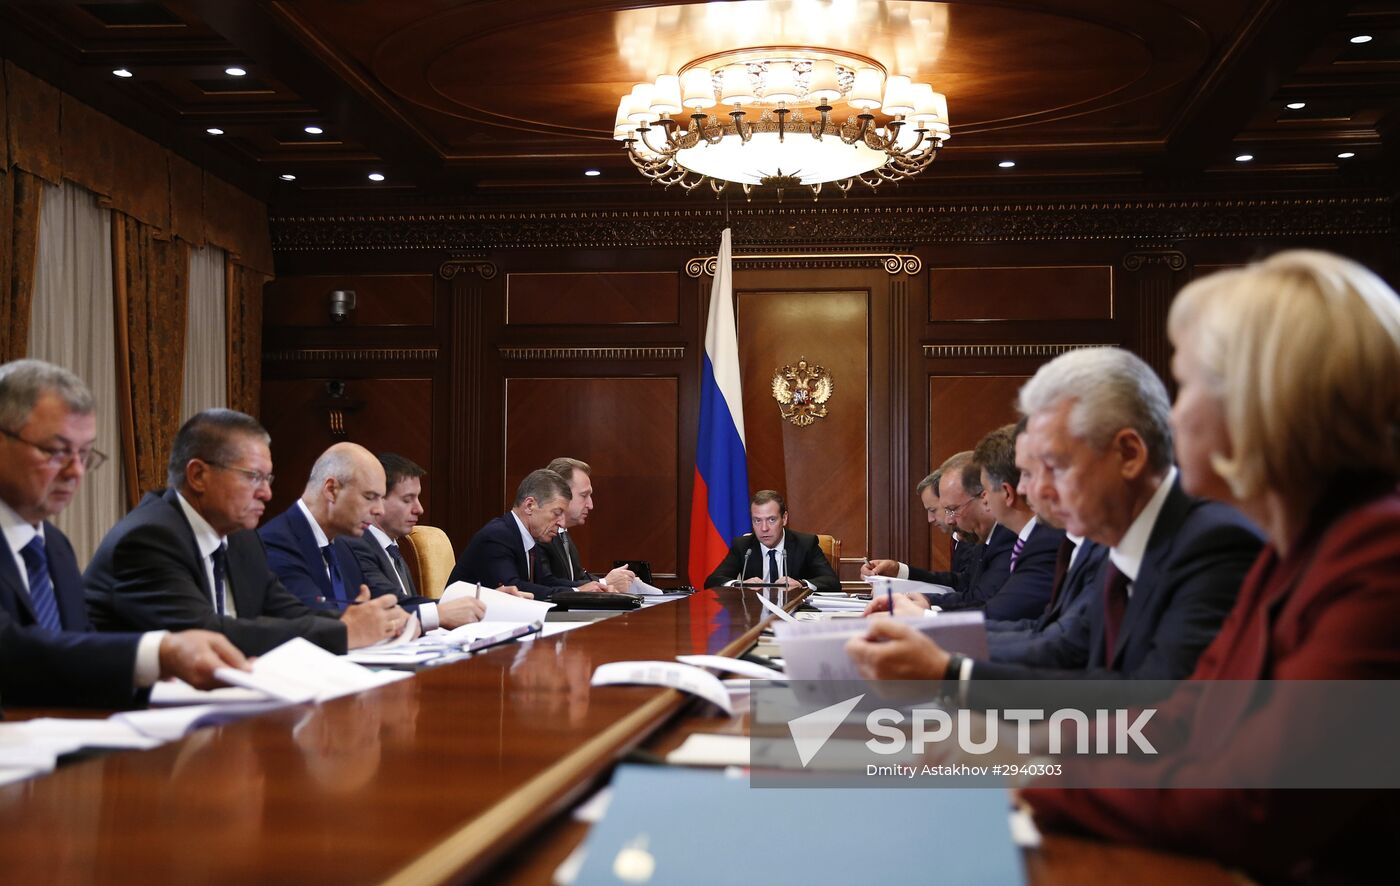 Prime Minister Dmitry Medvedev conducts meeting of presidential council on strategic development and priority projects